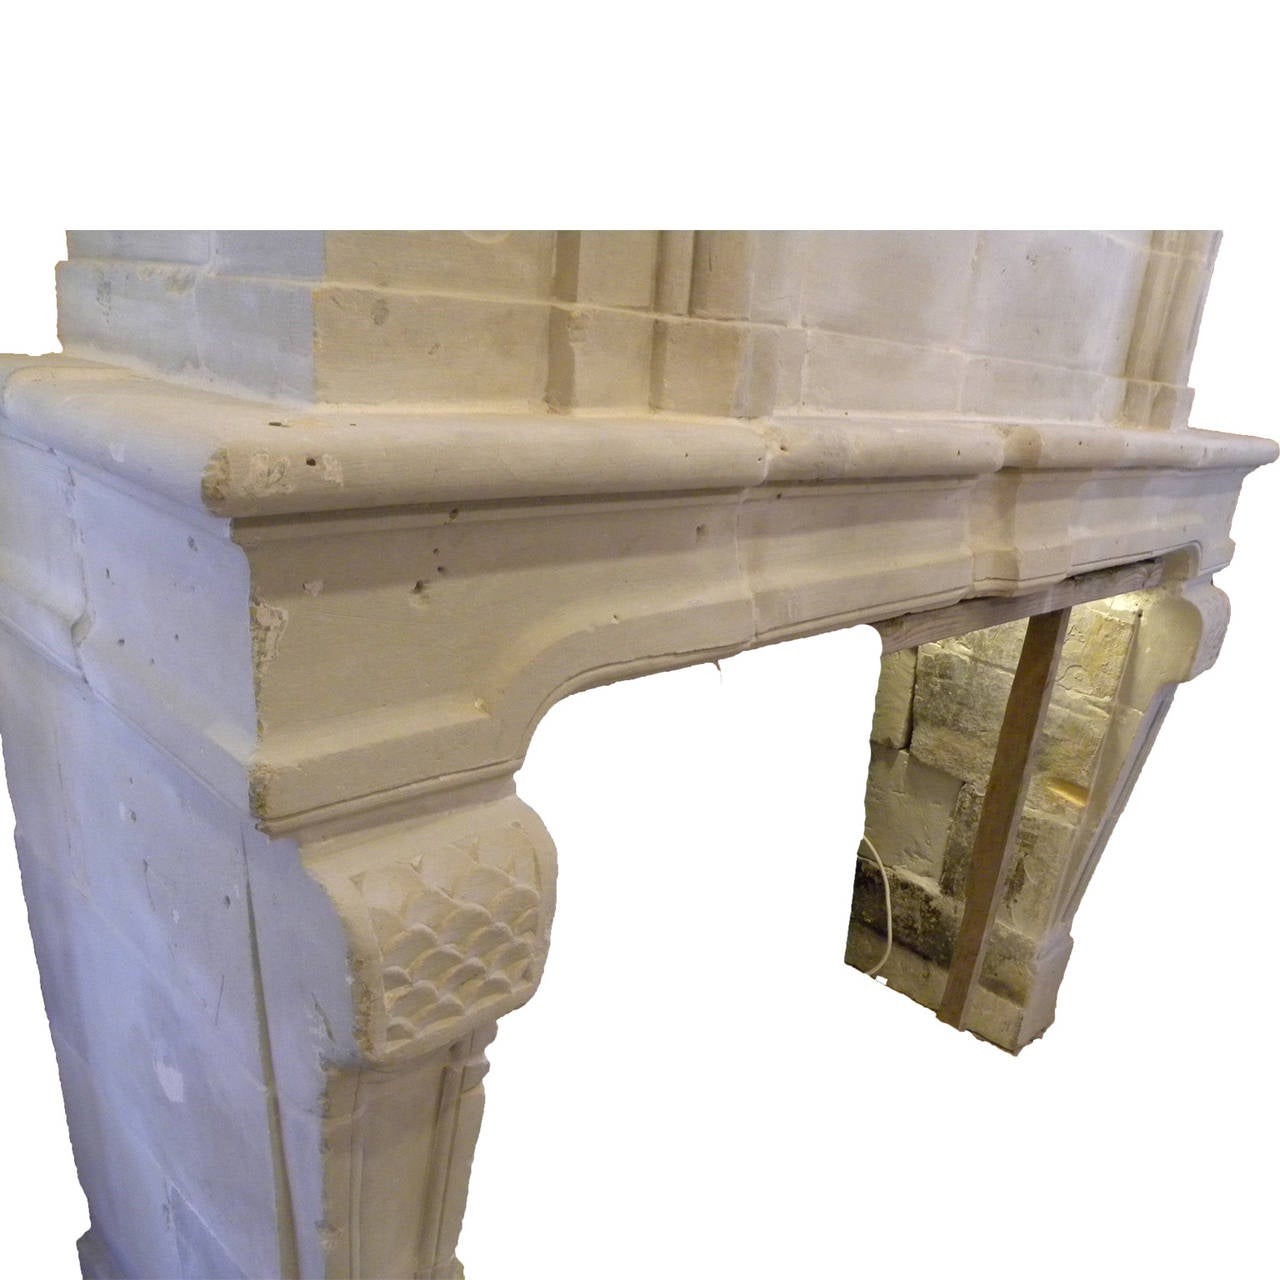 Antique French Limestone fireplace. This Louis XIV style fireplace with pier/trumeau is handcrafted in limestone and from the 18th century. This limestone fireplace is beautiful example of the craftsmanship of the era . Carved accents details on the